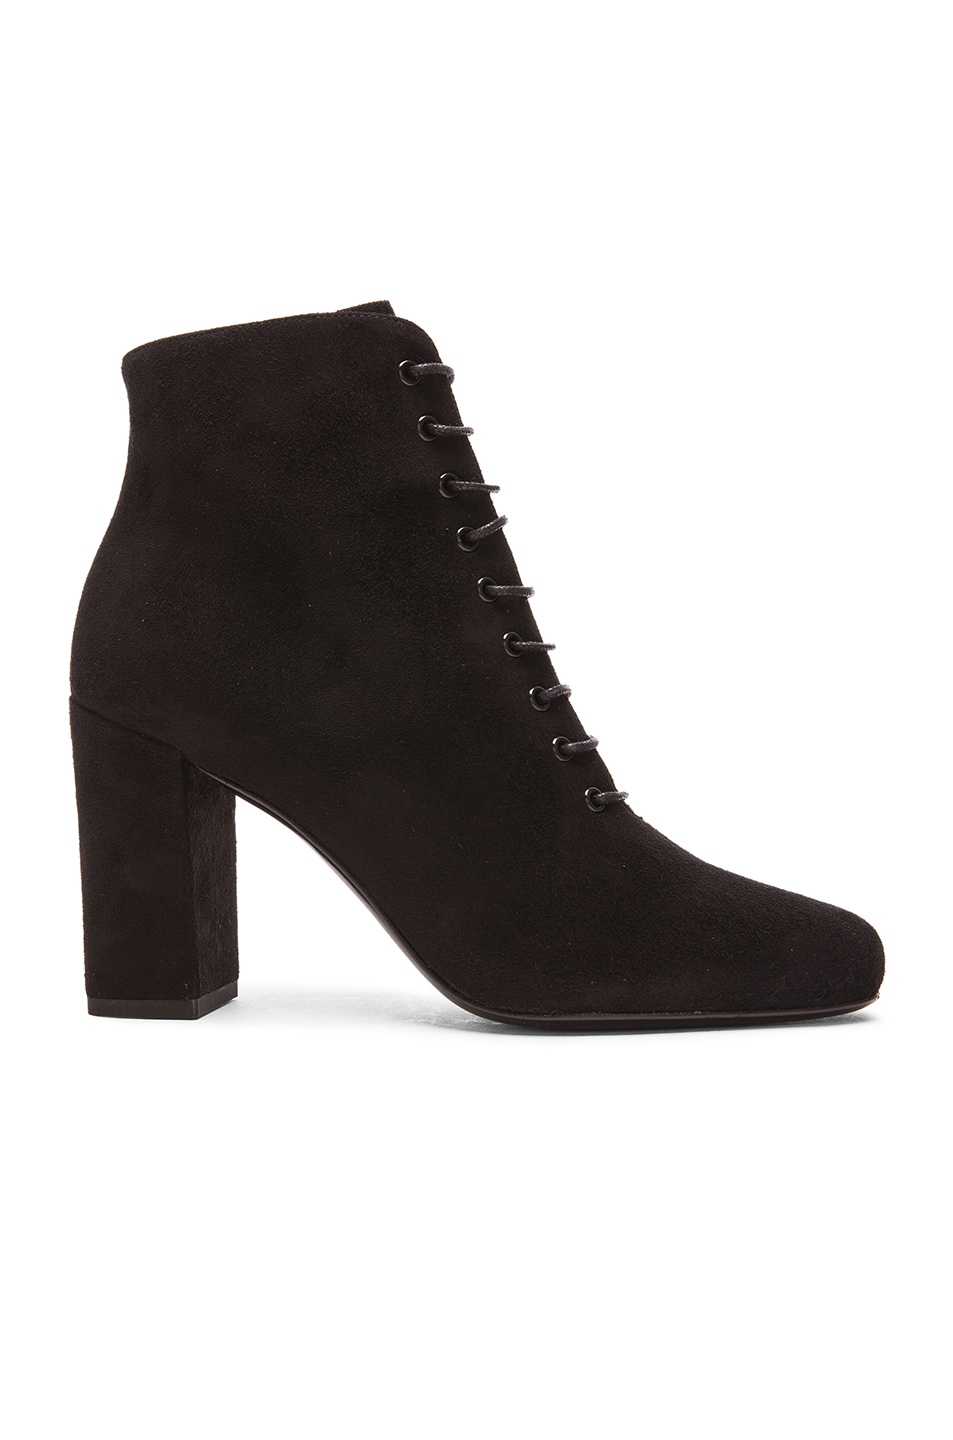 Image 1 of Saint Laurent Suede Lace Up Babies Boots in Black